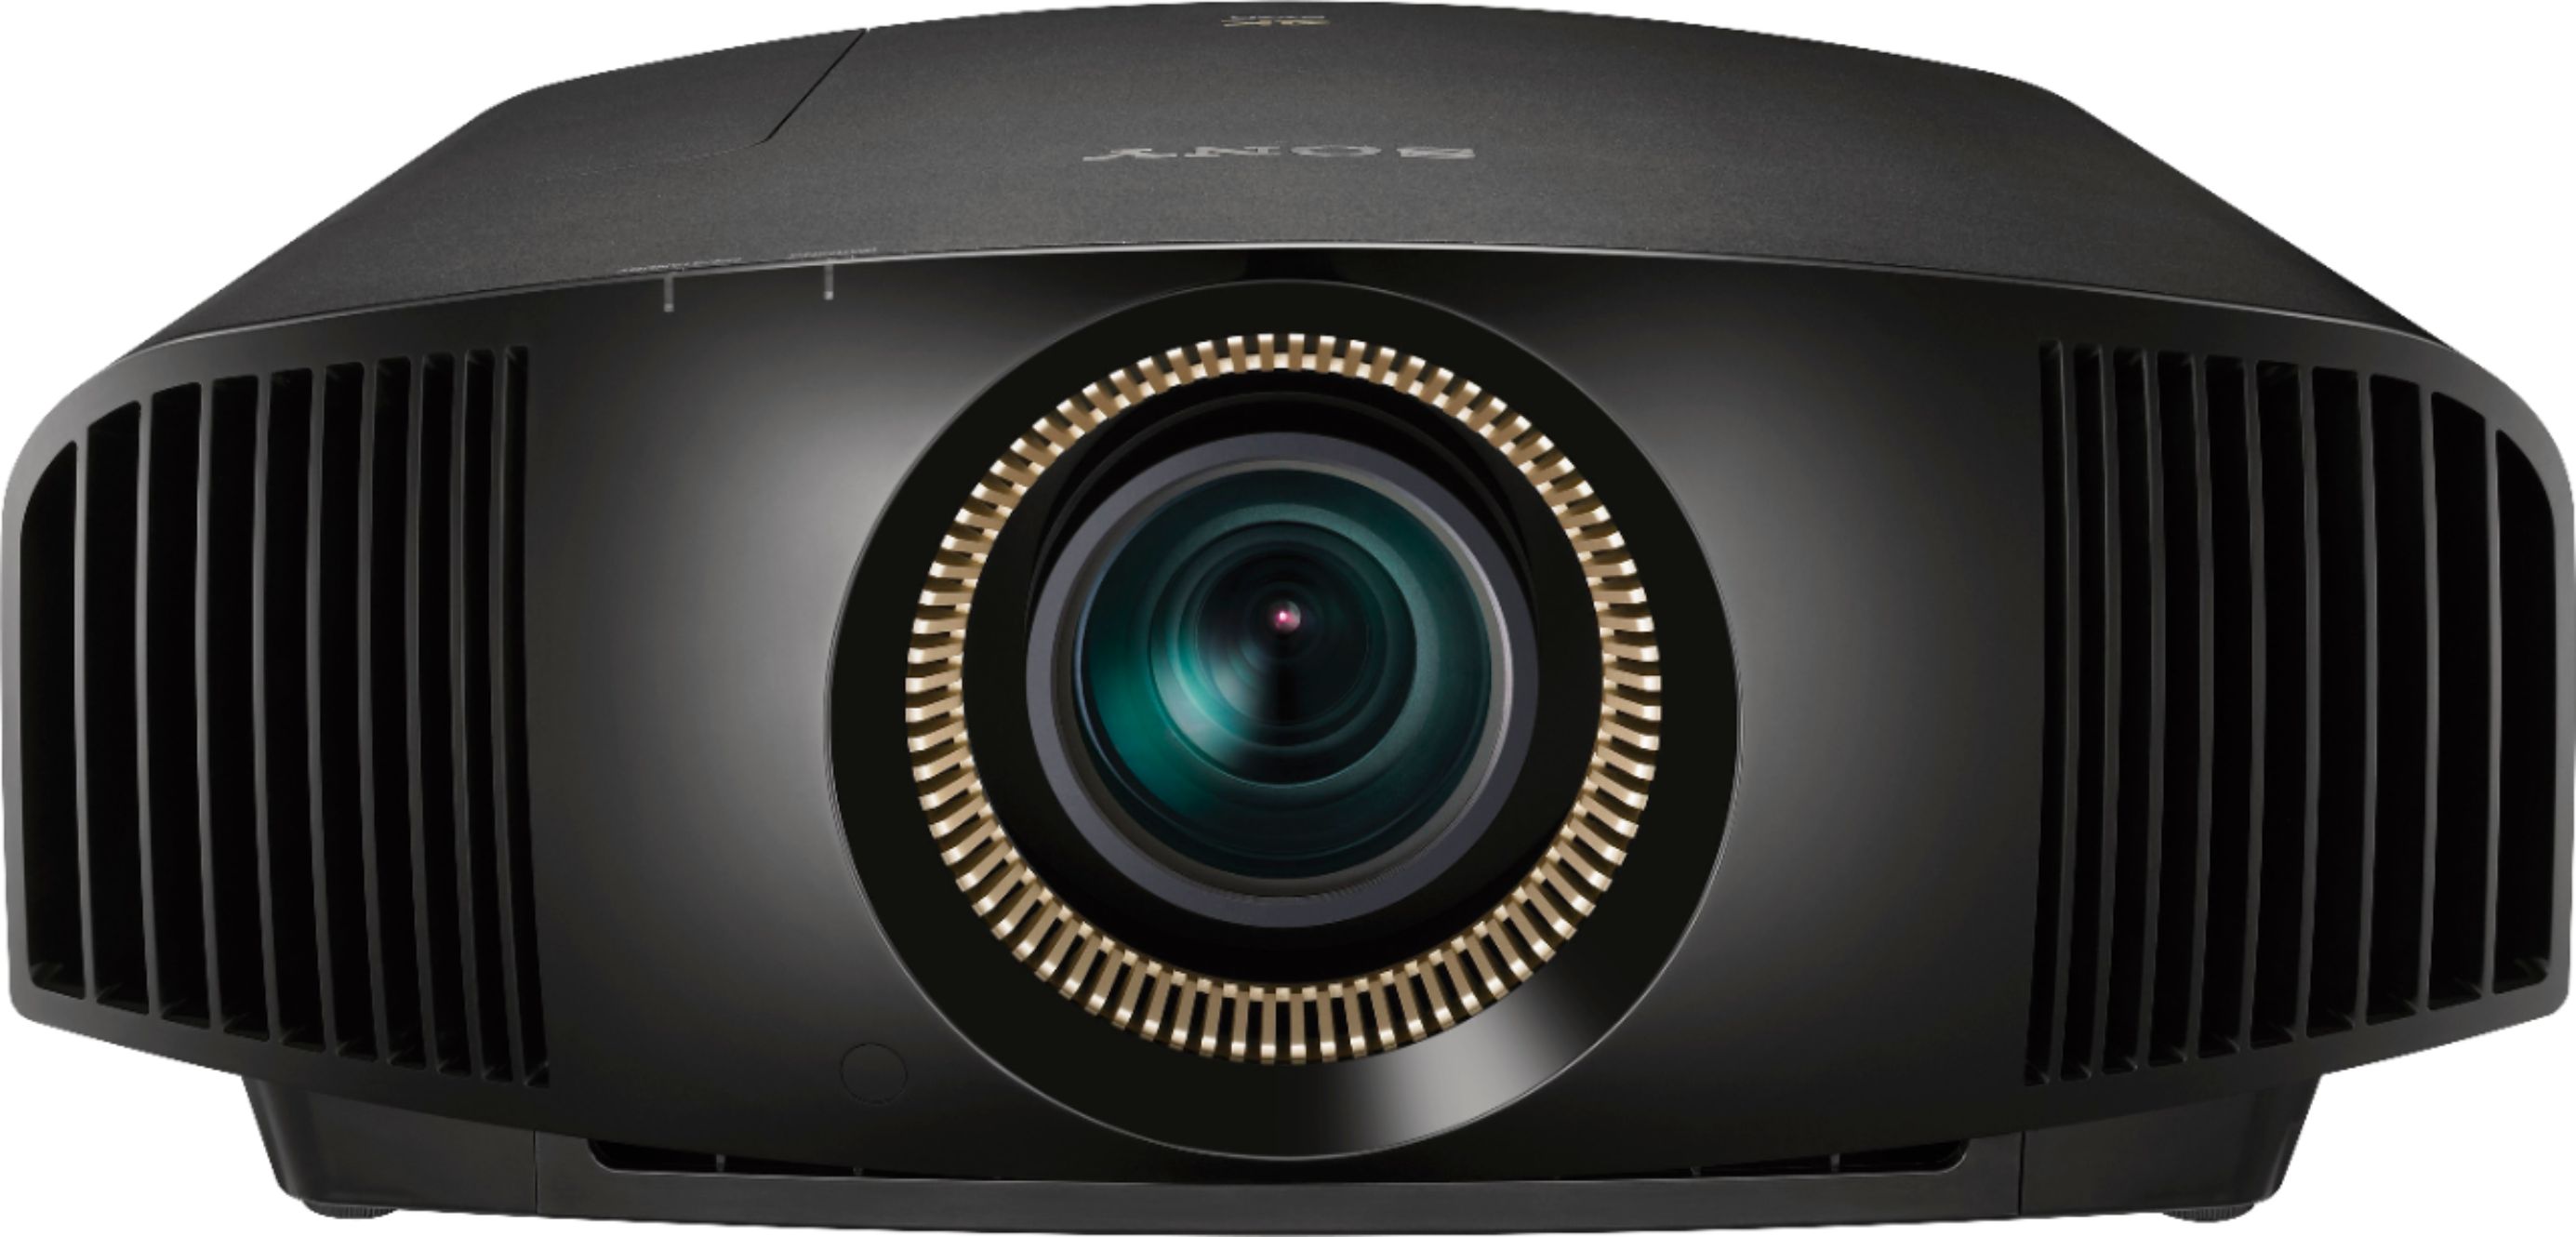 Sony - 4K HDR Home Theater Projector - Black